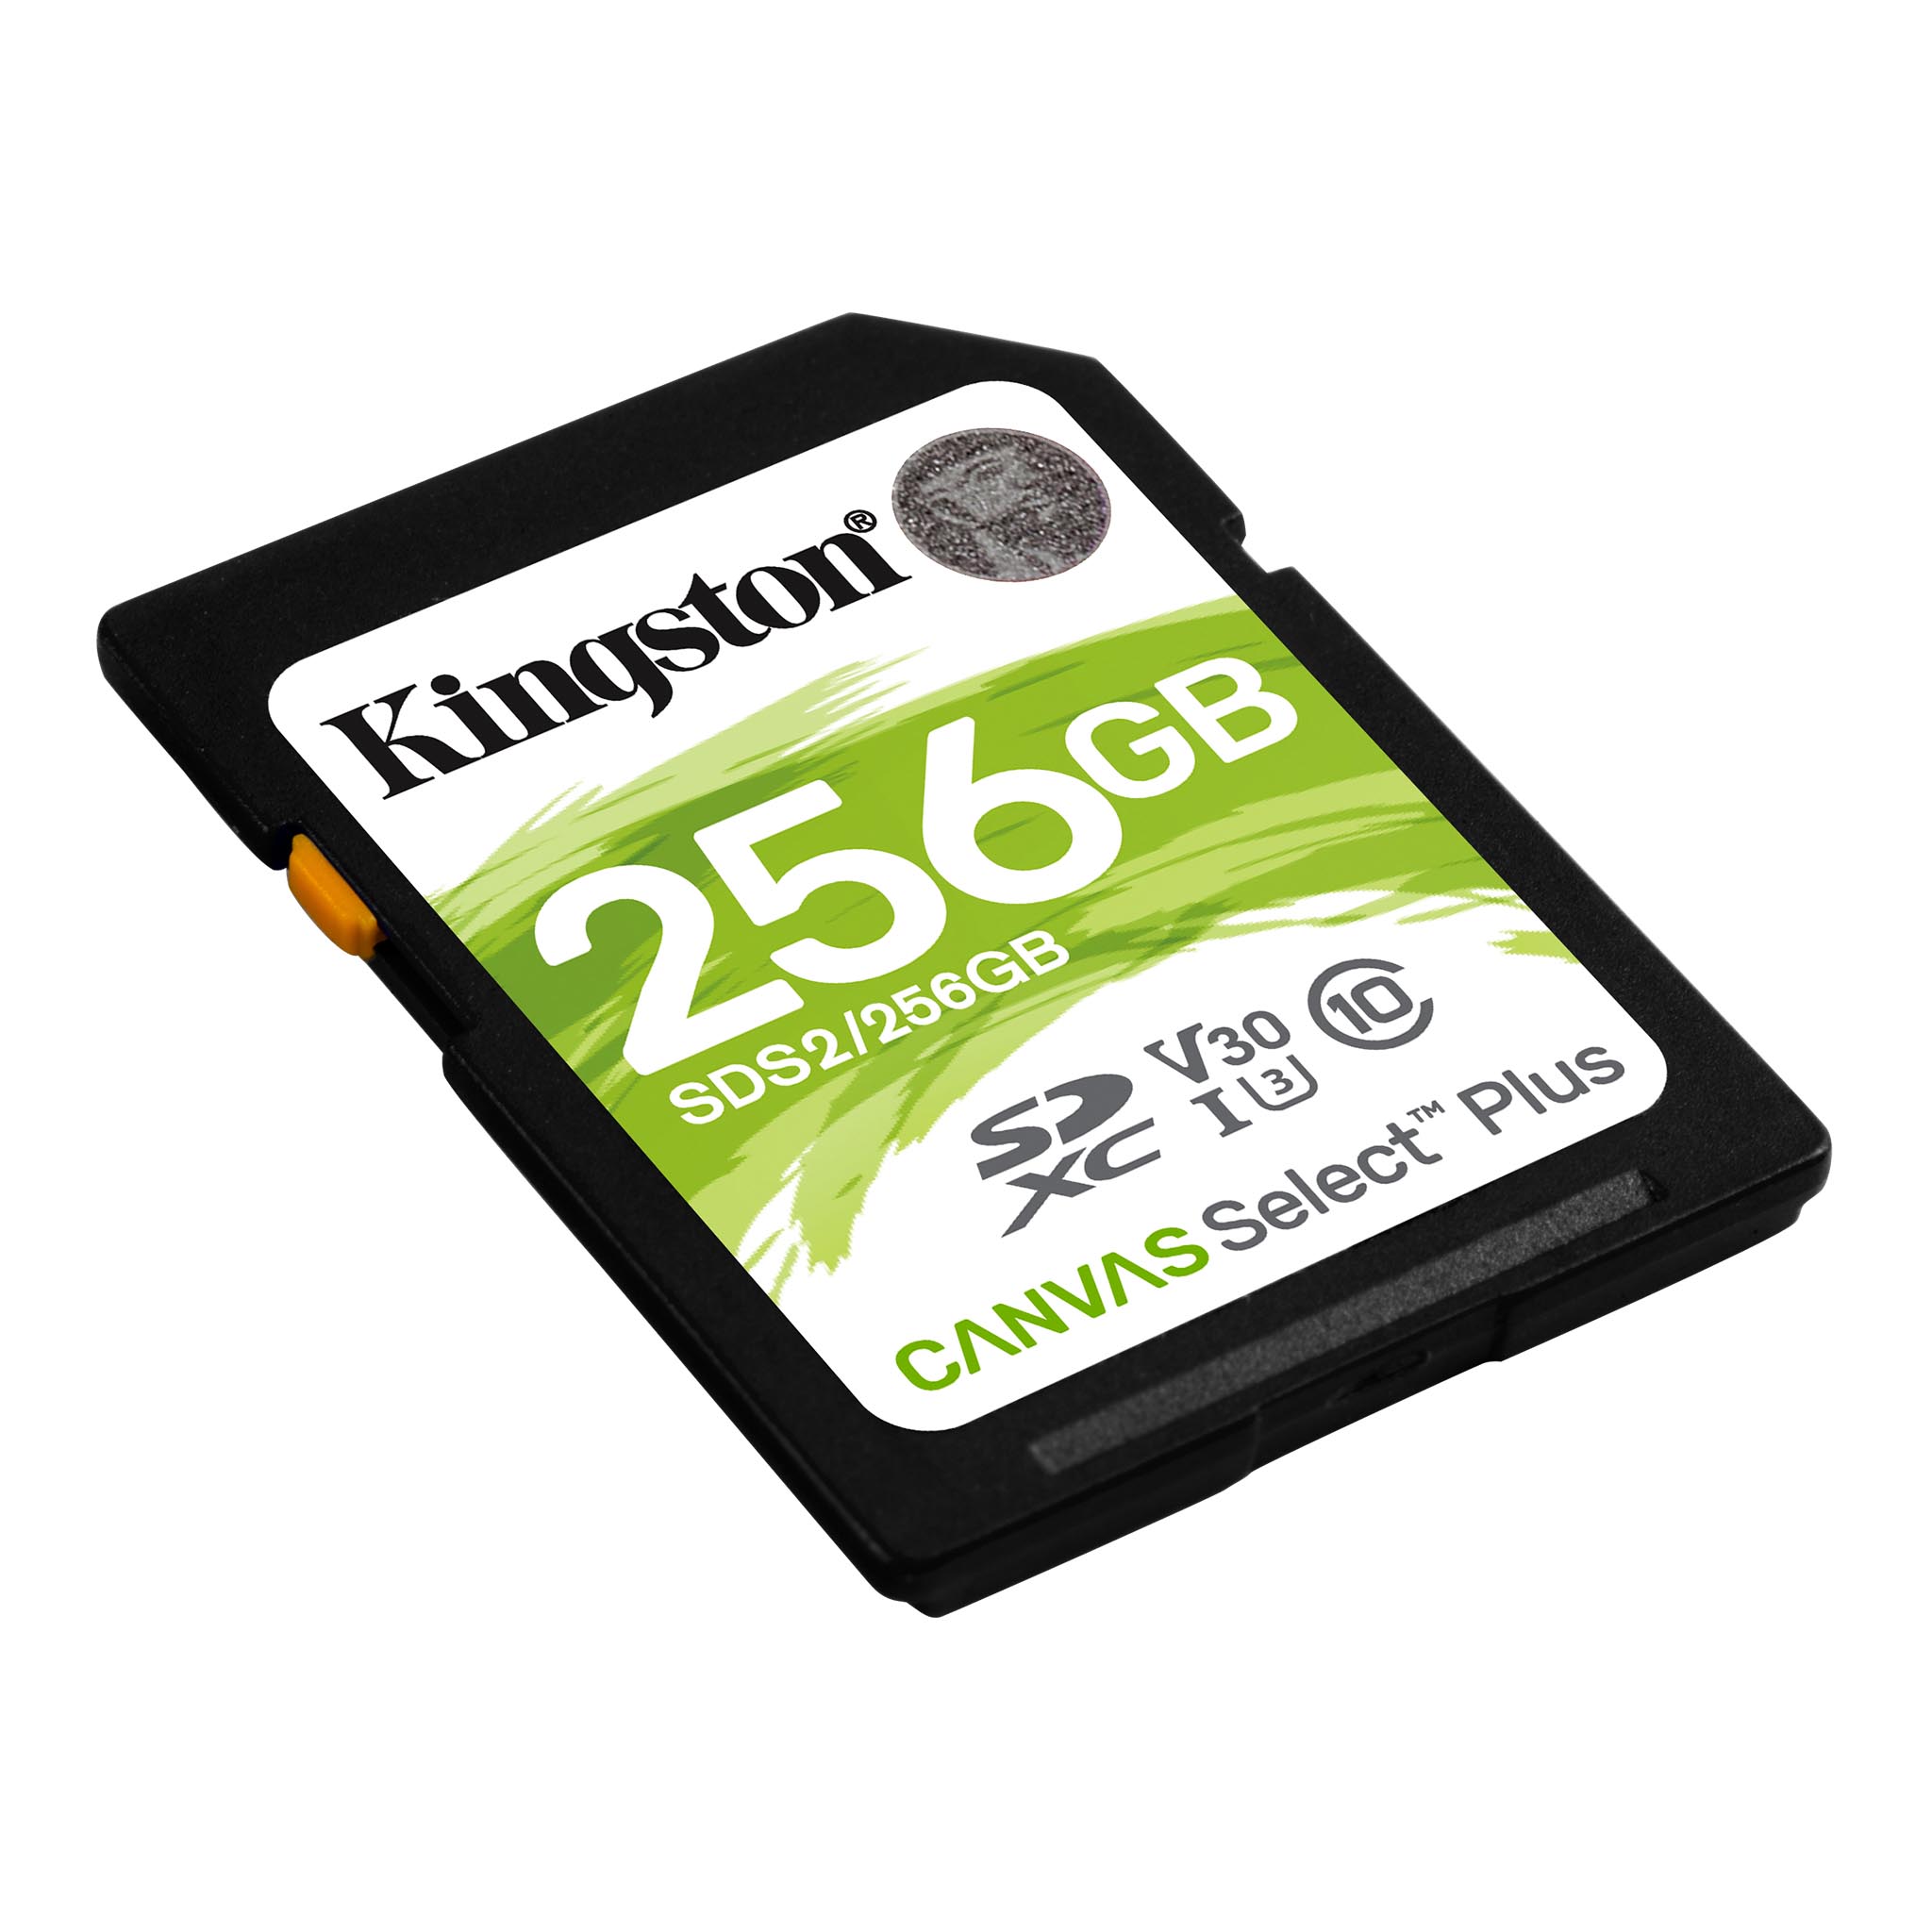 Professional Kingston 512GB for LG K40 MicroSDXC Card Custom Verified by SanFlash. 80MBs Works with Kingston 